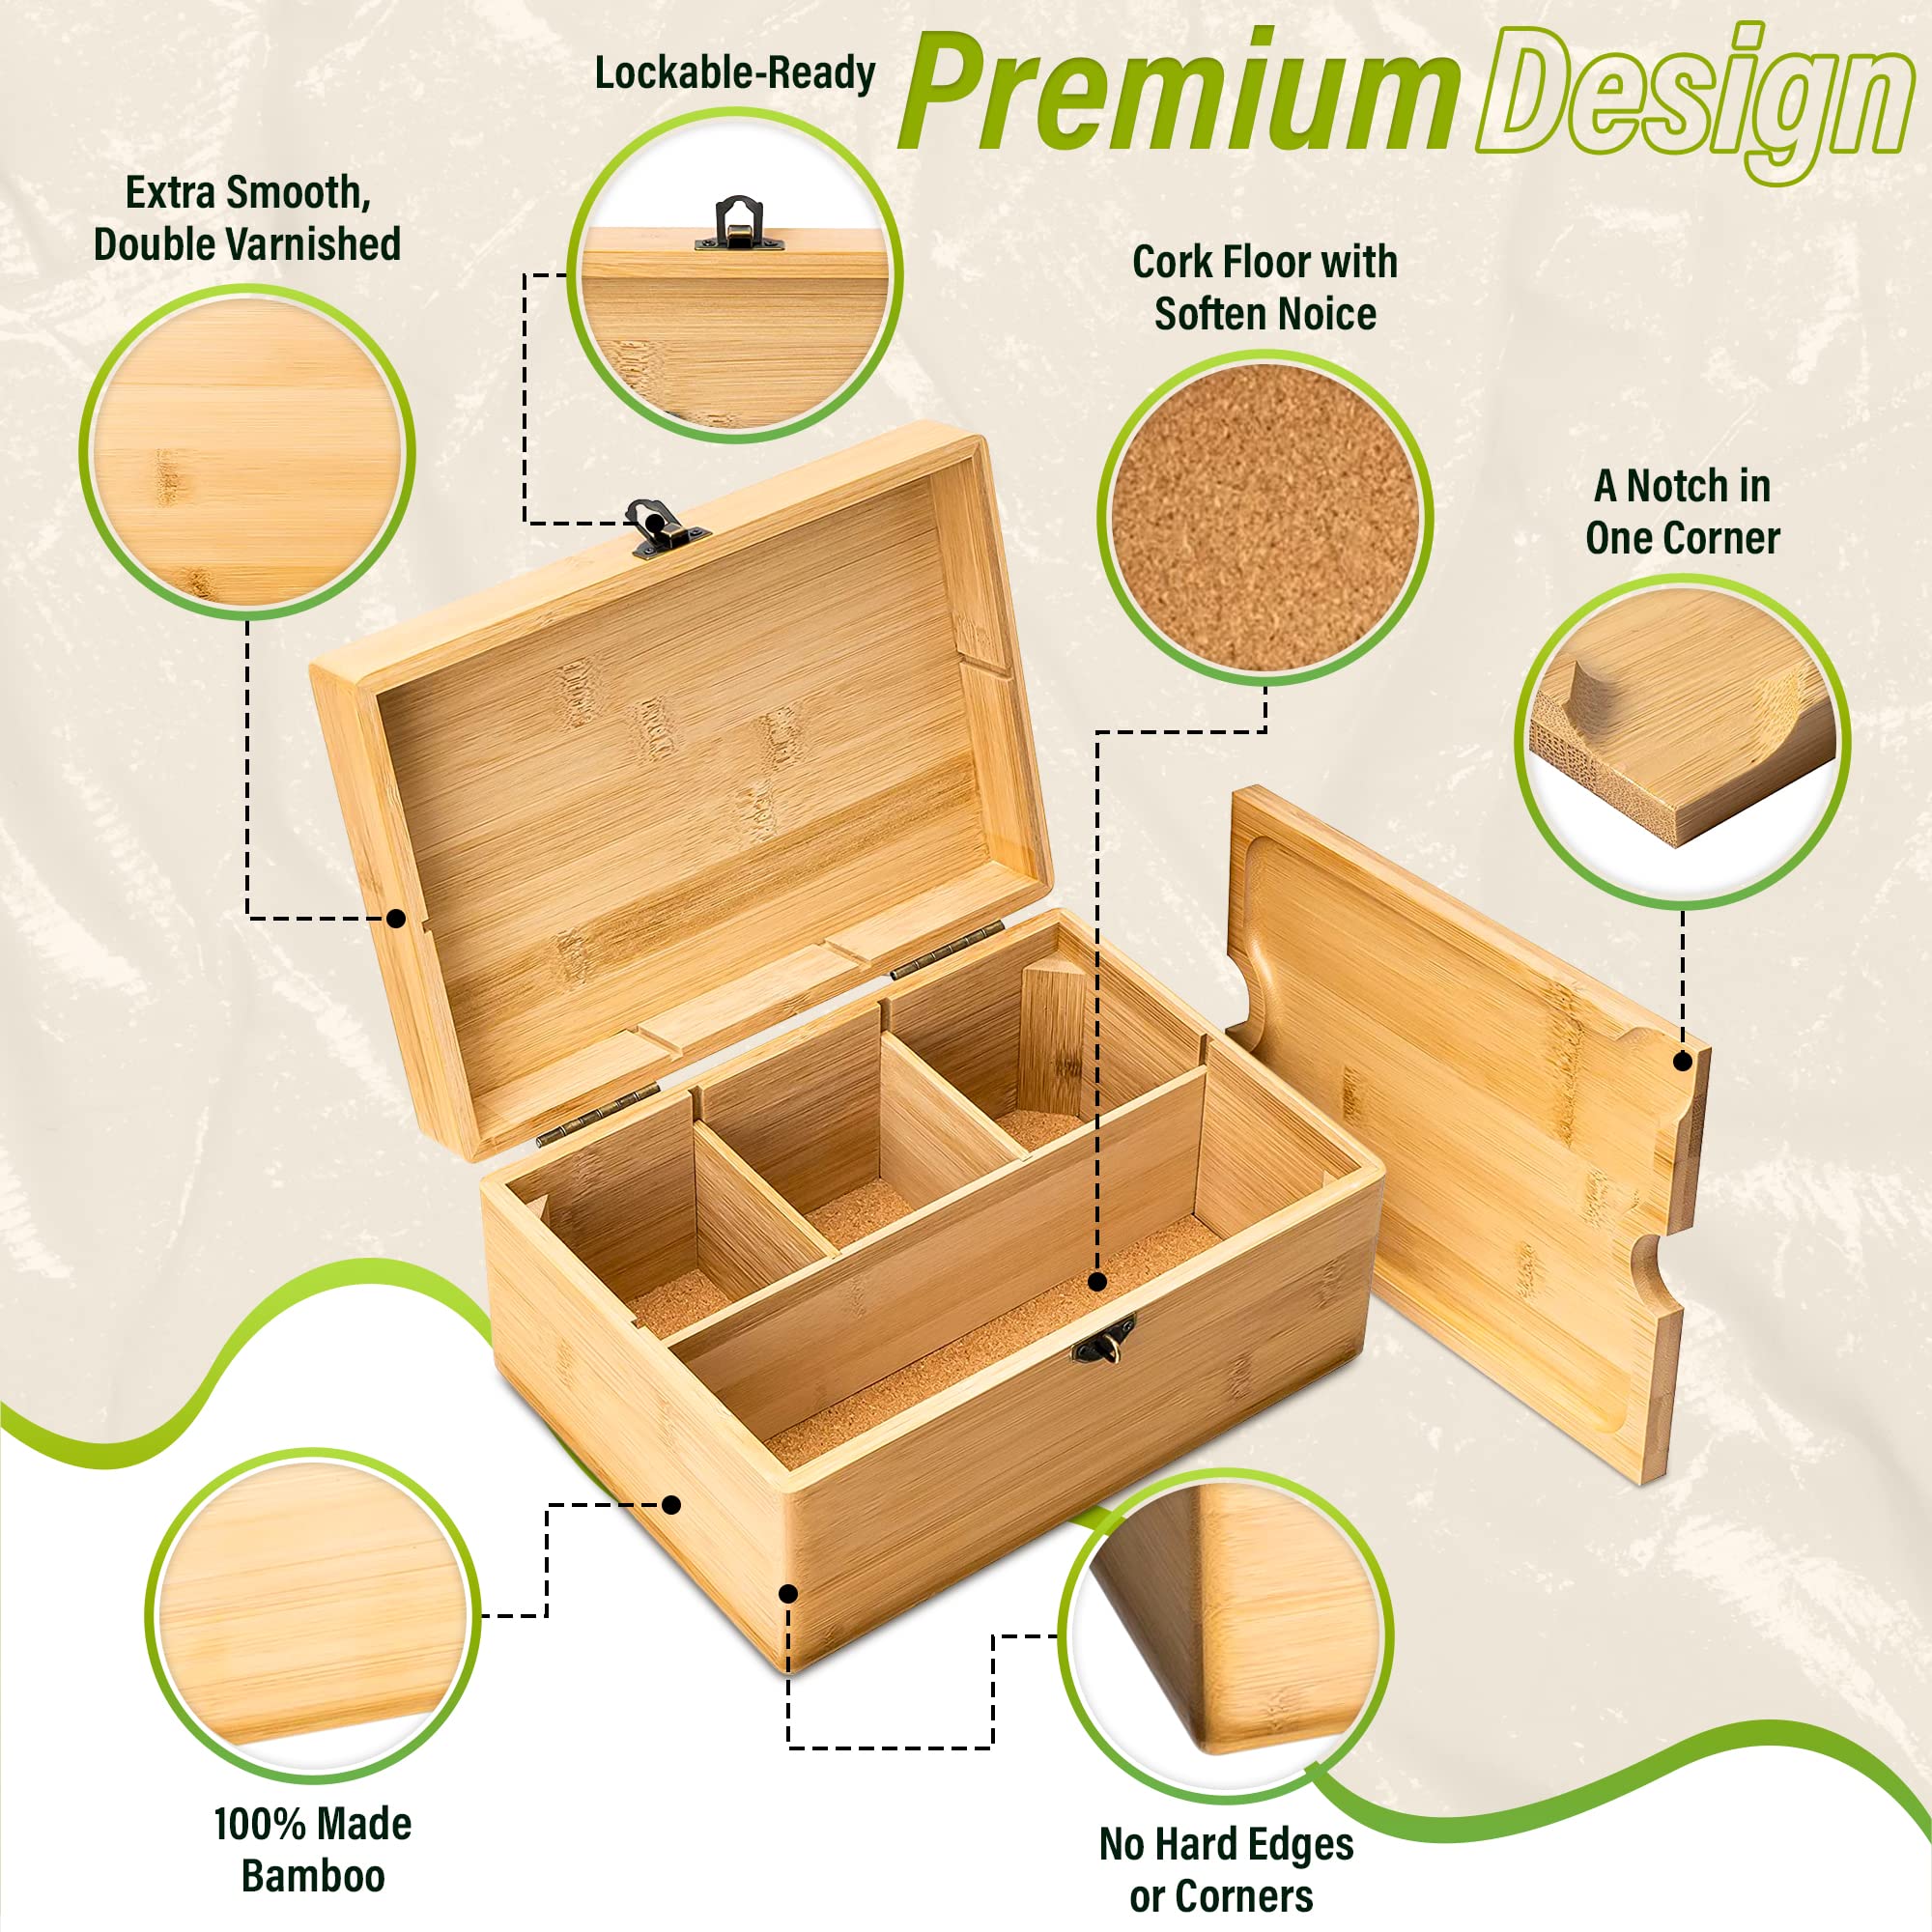 Adealistic Bamboo Wood Storage Box with Working Tray Kit For Daily Home Use Decorative Storage Box Design